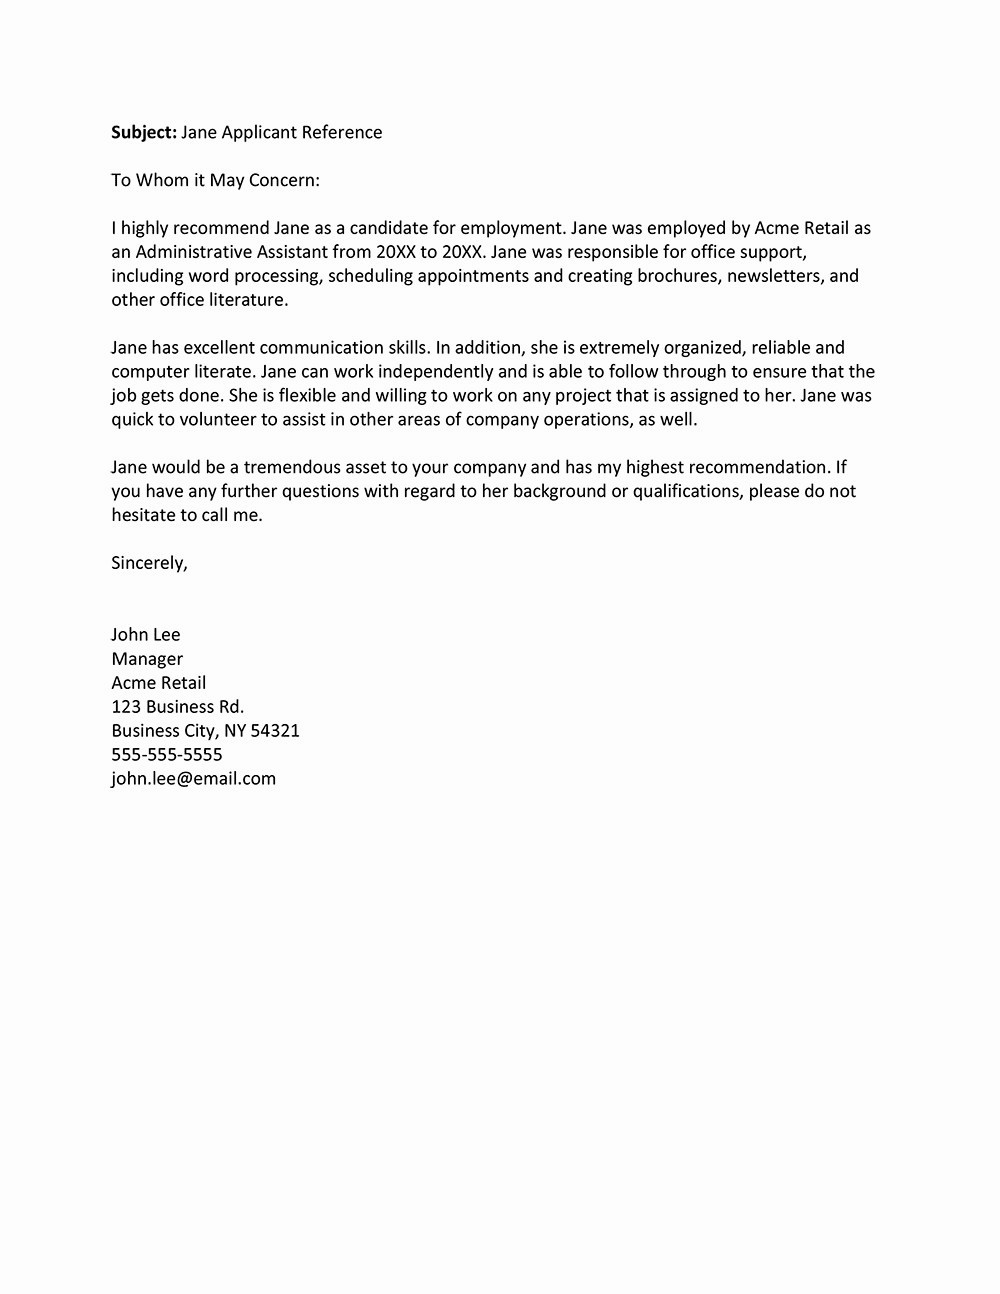 Short Recommendation Letter for Employee Unique Sample Letter Professional Clearance format for